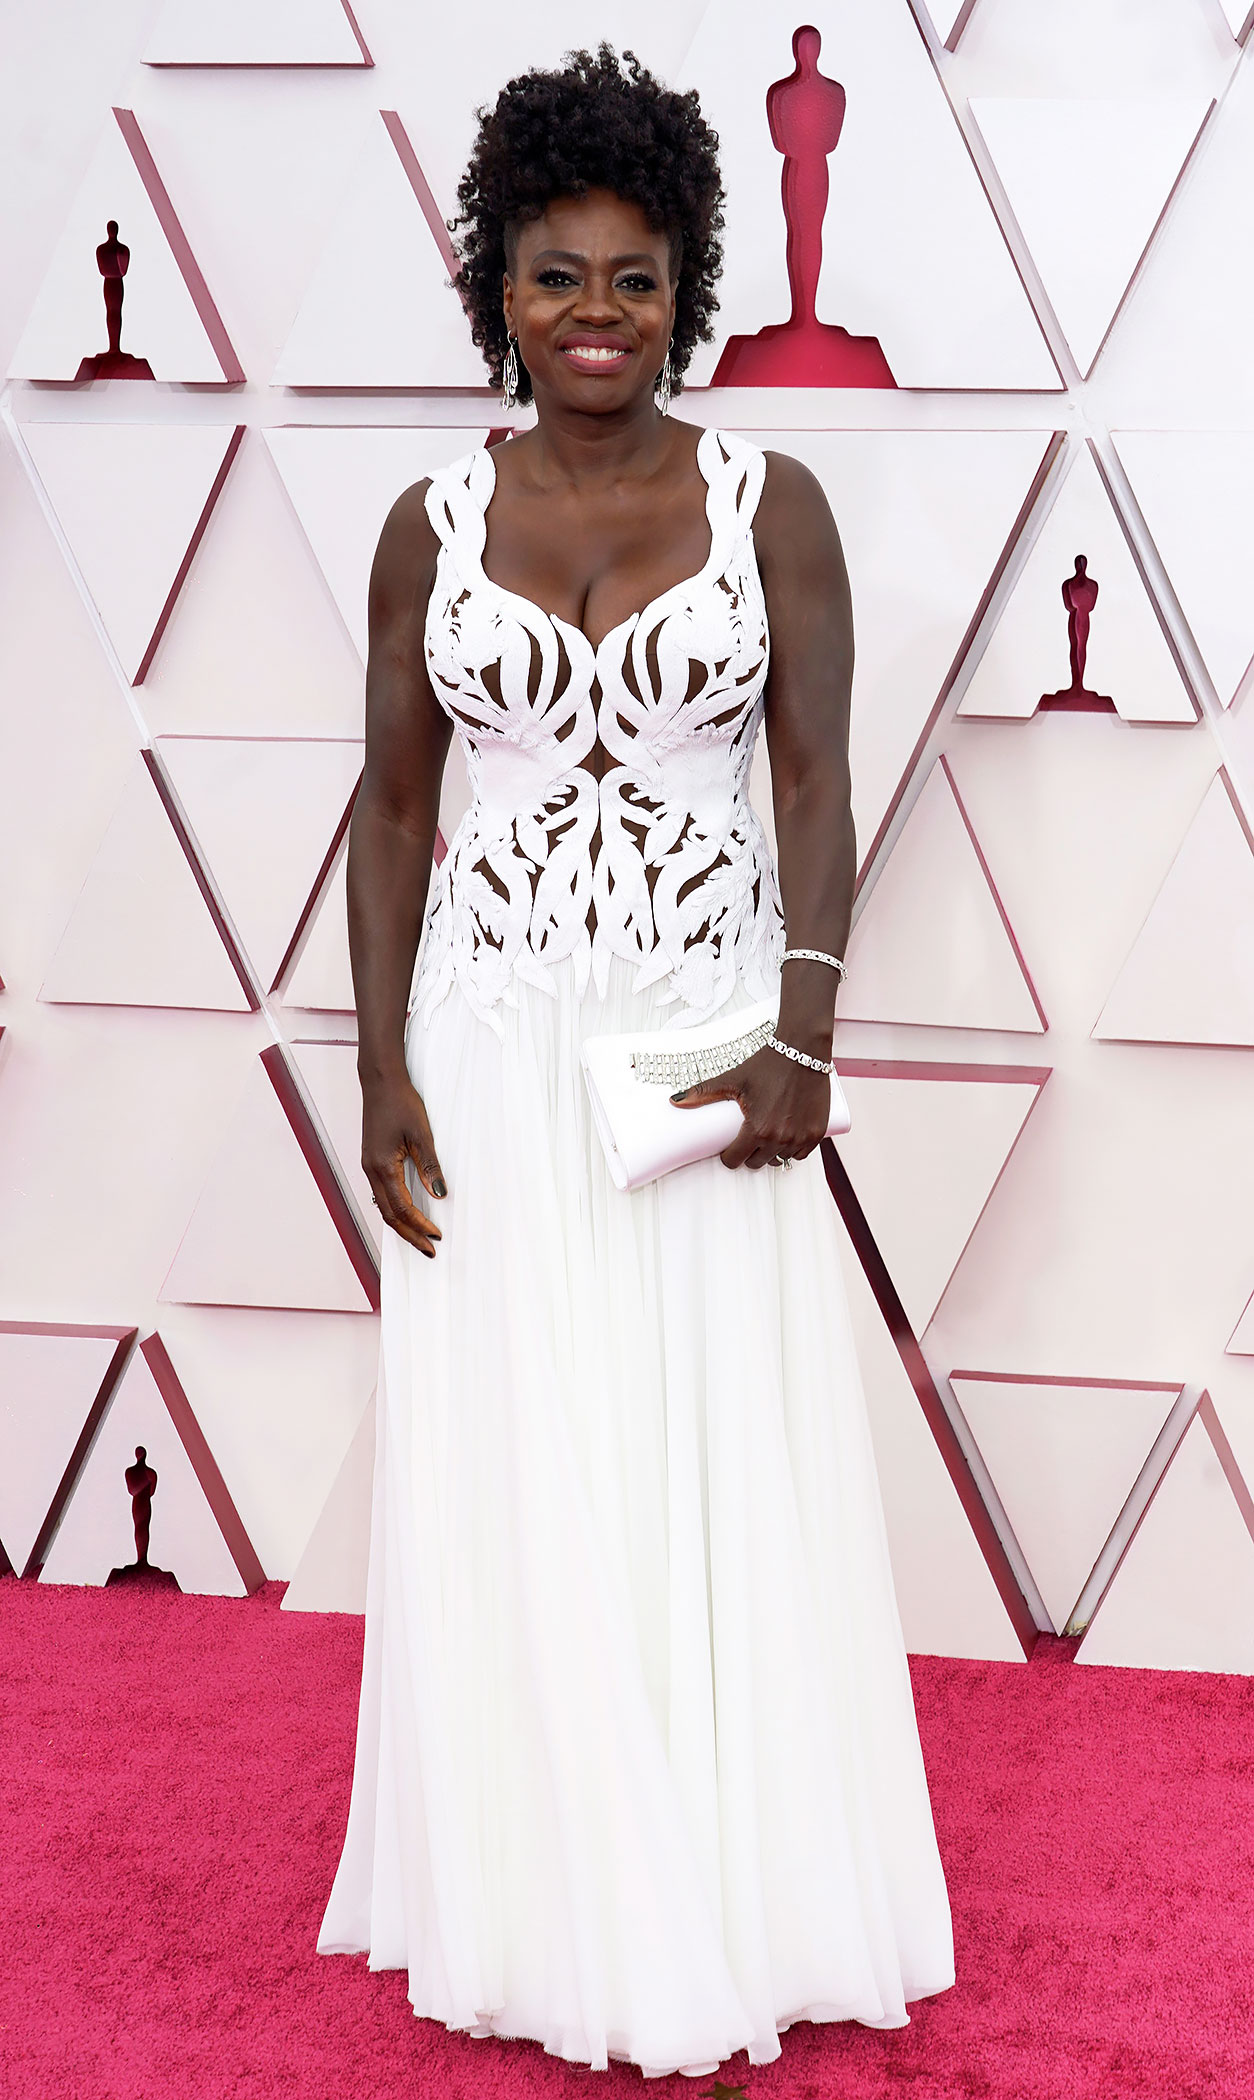 The Celebrities Who Landed On The Oscars 2014 Worst-Dressed List